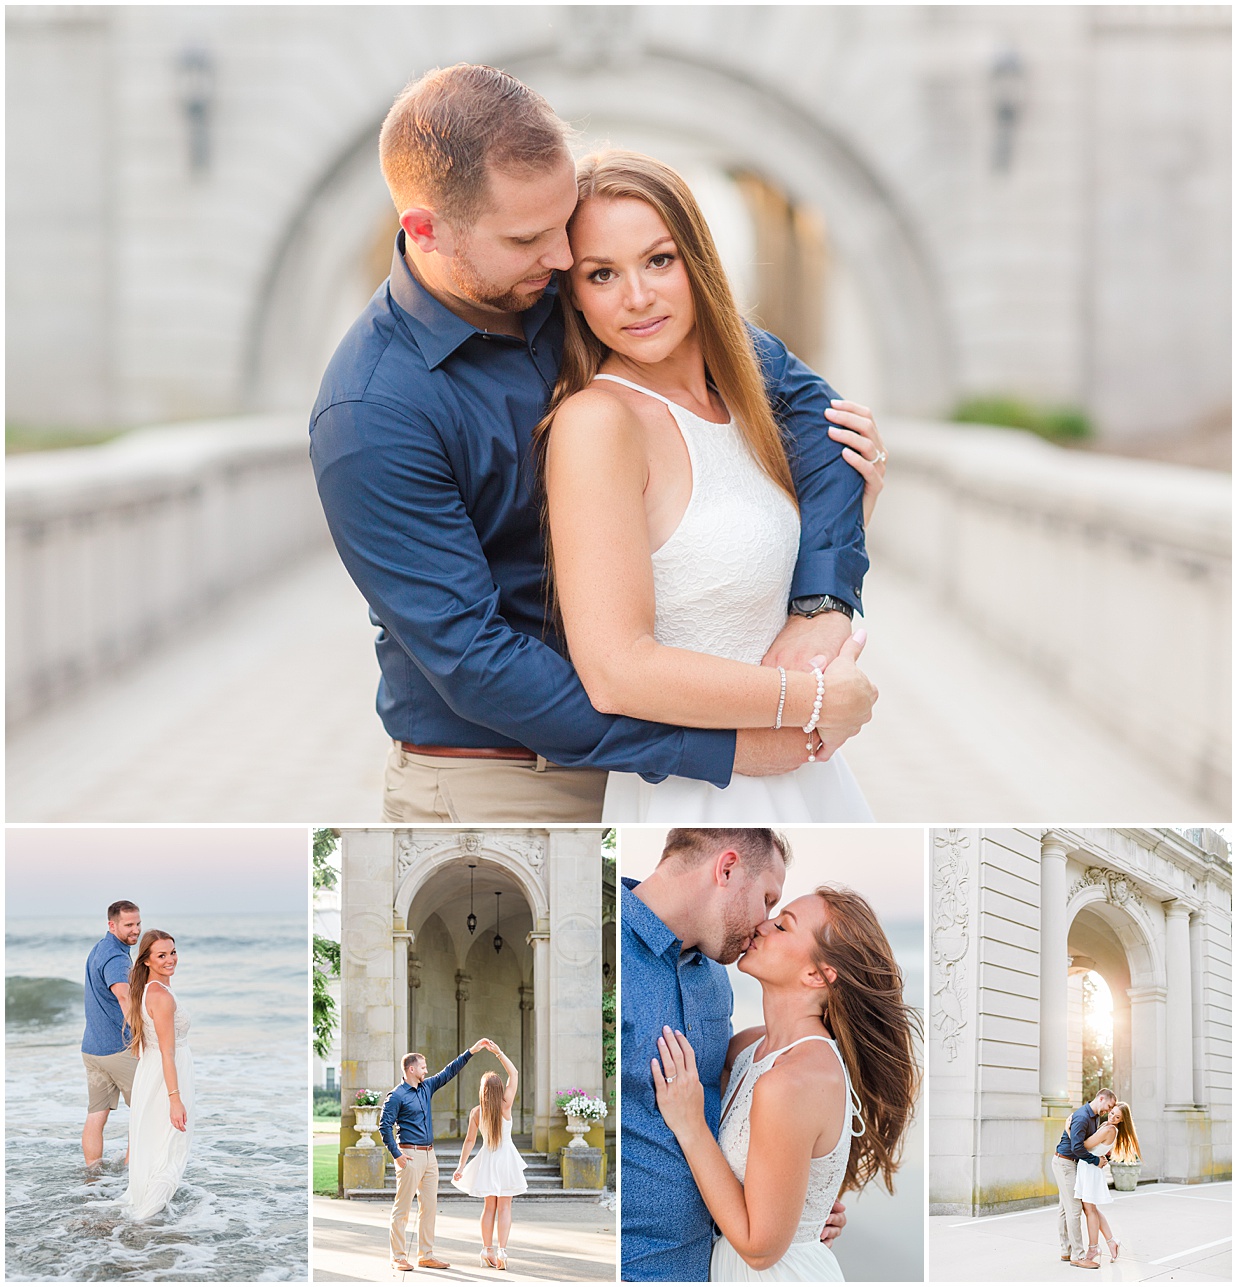 Summer Engagement session inspiration at Monmouth University by photographer Lauren Kearns